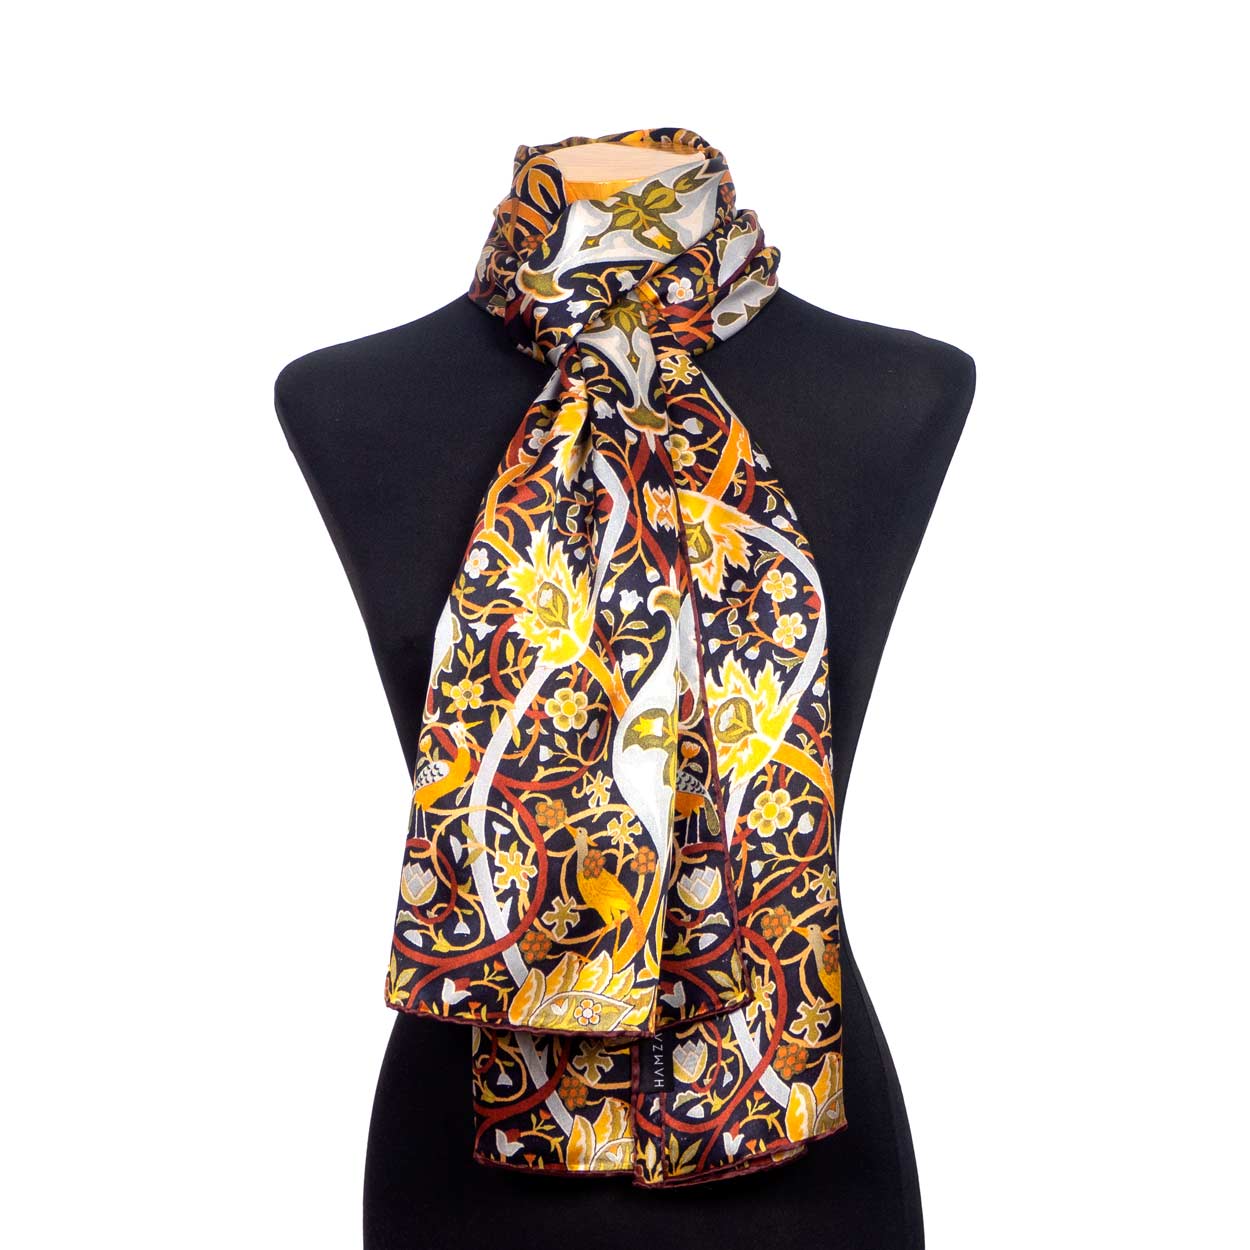 Silk scarf for neck with floral print